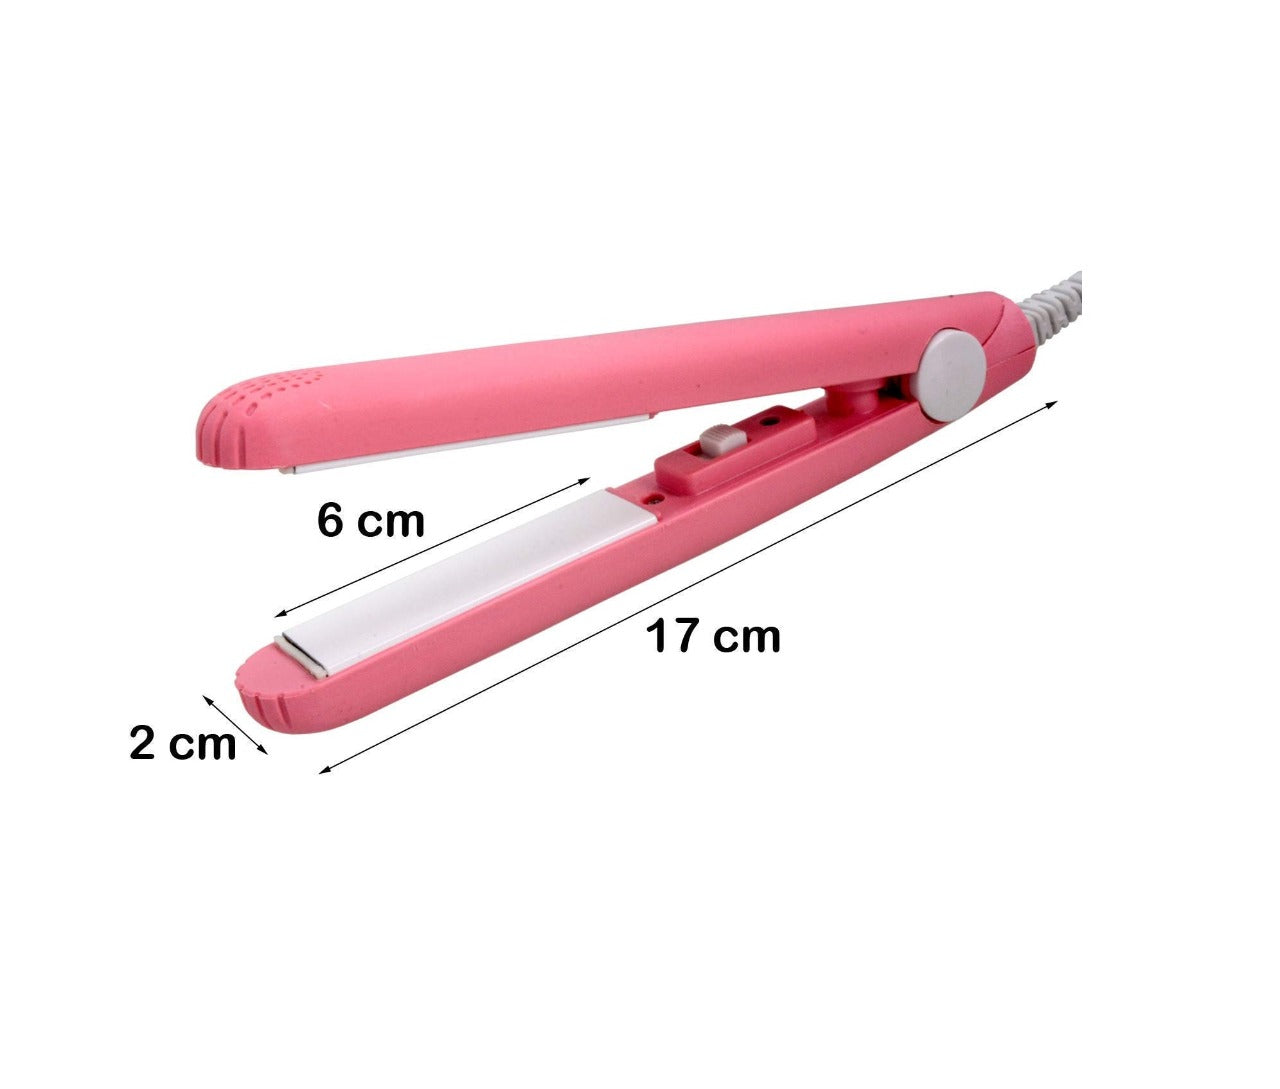 1215 Mini Portable Electronic Hair Straightener and Curler - China, 0.151 kgs